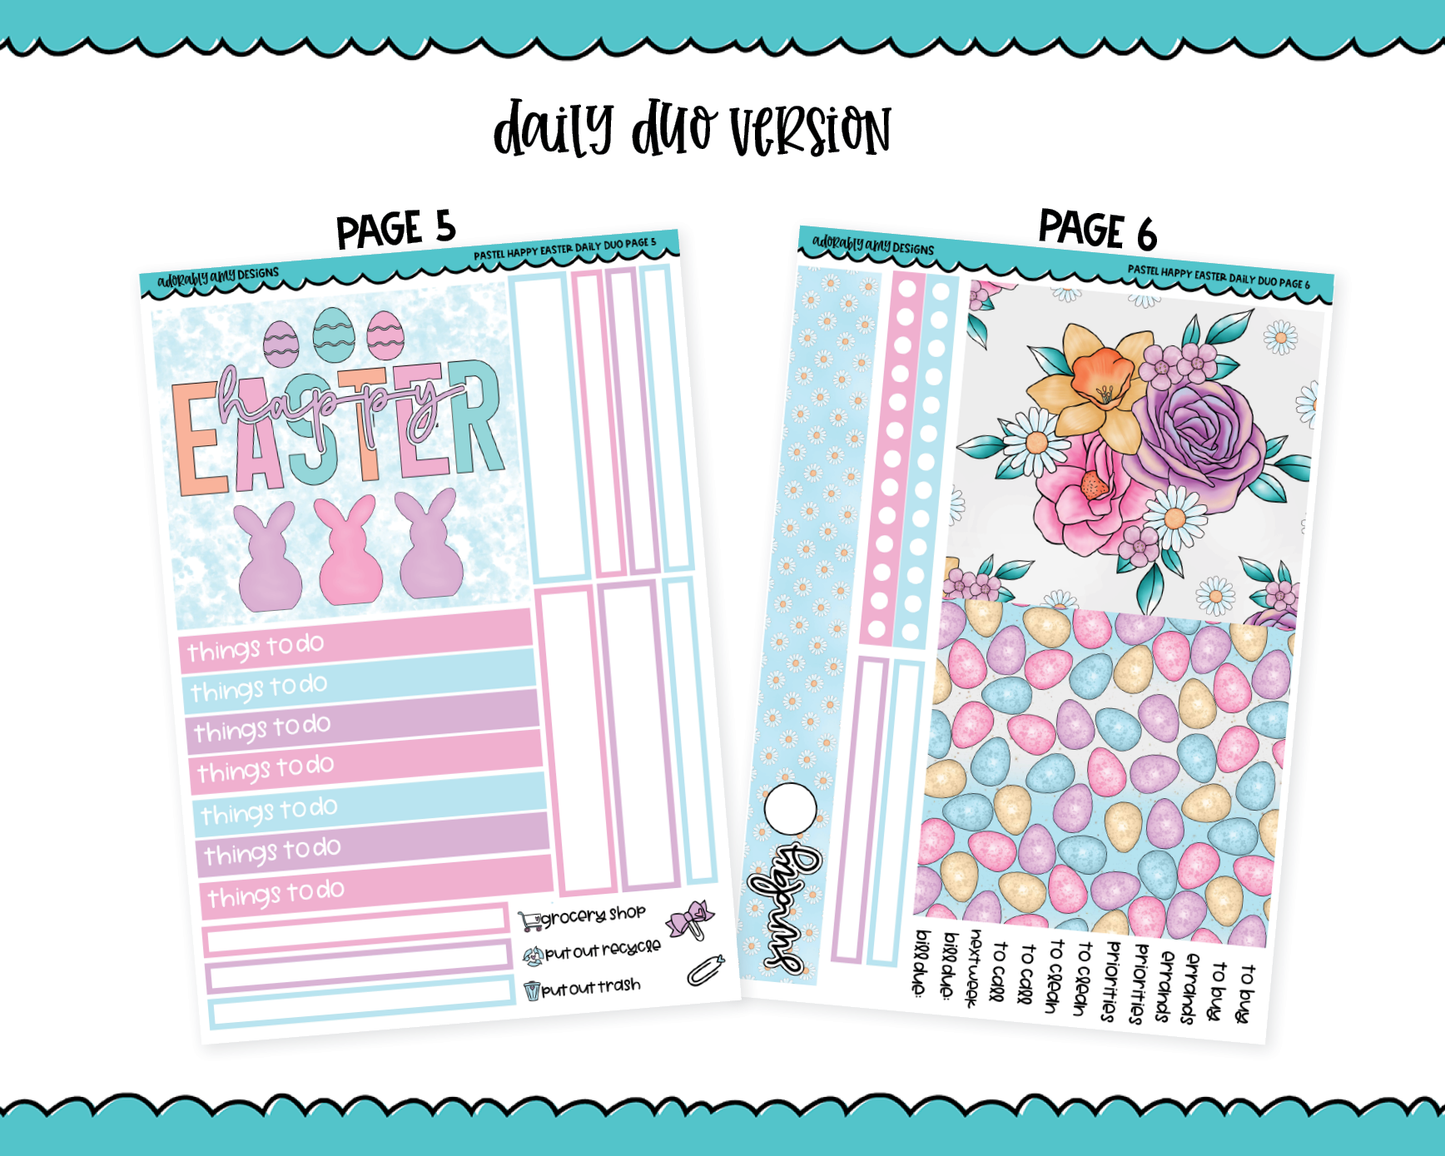 Daily Duo Pastel Happy Easter Themed Weekly Planner Sticker Kit for Daily Duo Planner